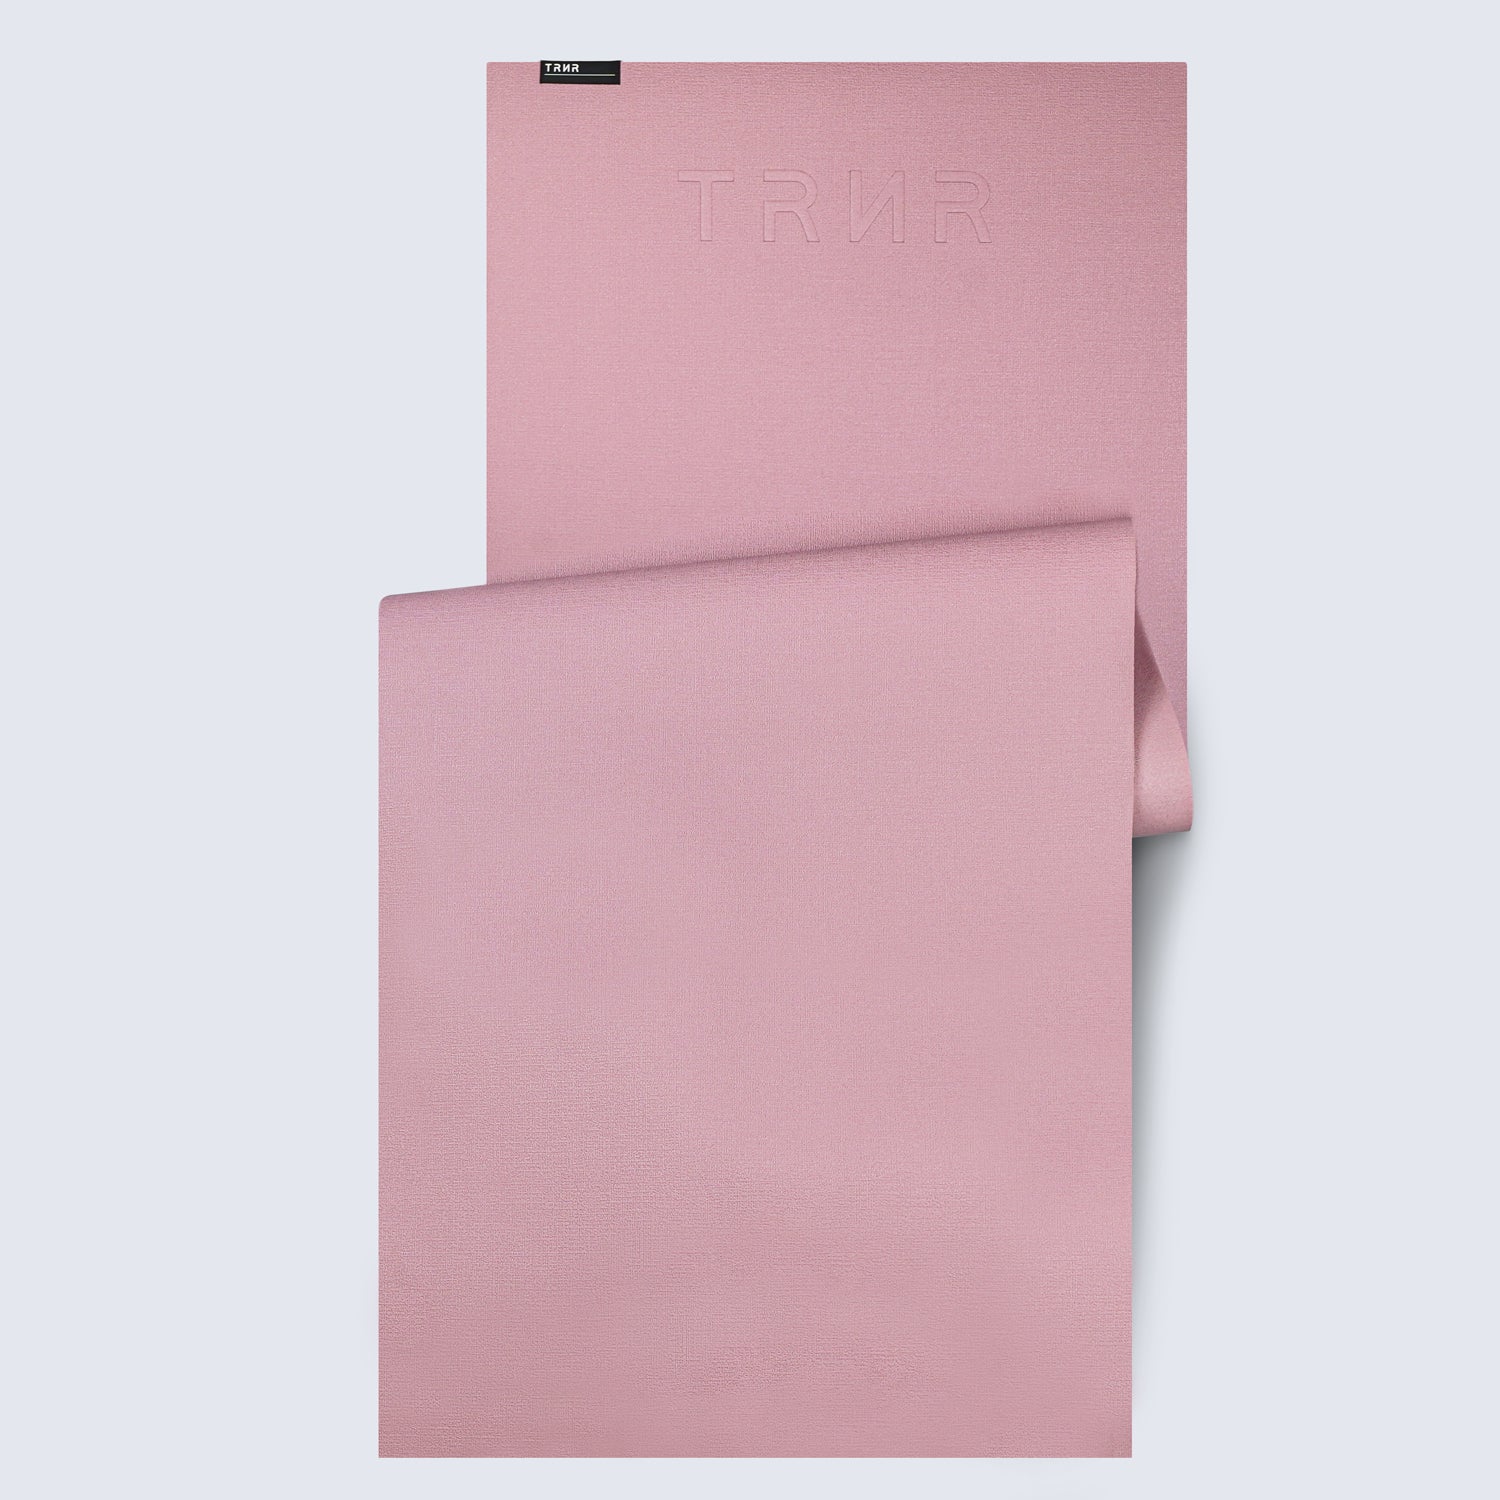 Overview of the Neo Mat 6 mm (Rose Colour) by TRNR | Featuring Debossed TRNR Logo and Label